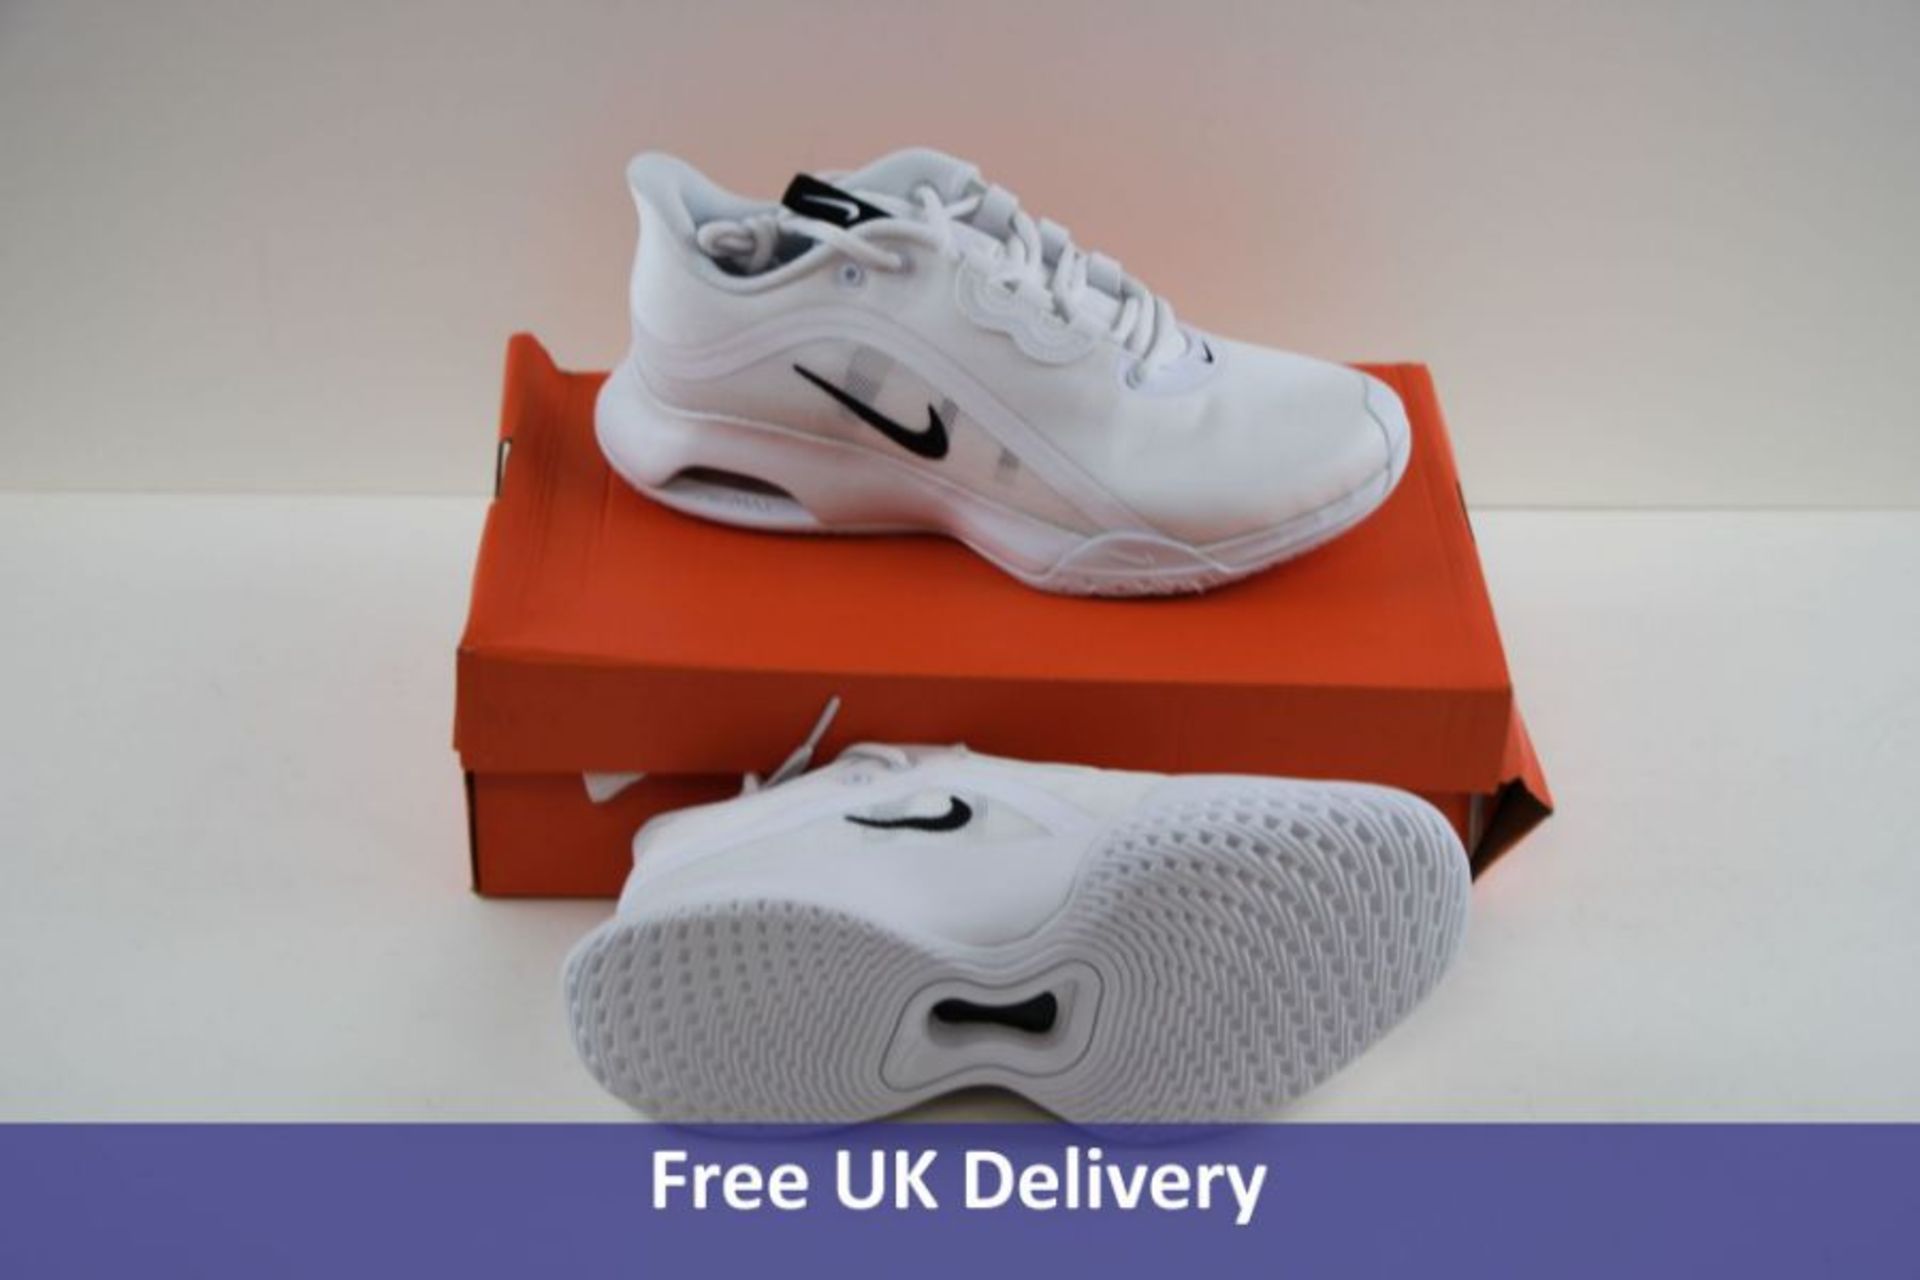 NIke Women's Air Max Volley Trainers, White and Black, UK 5.5